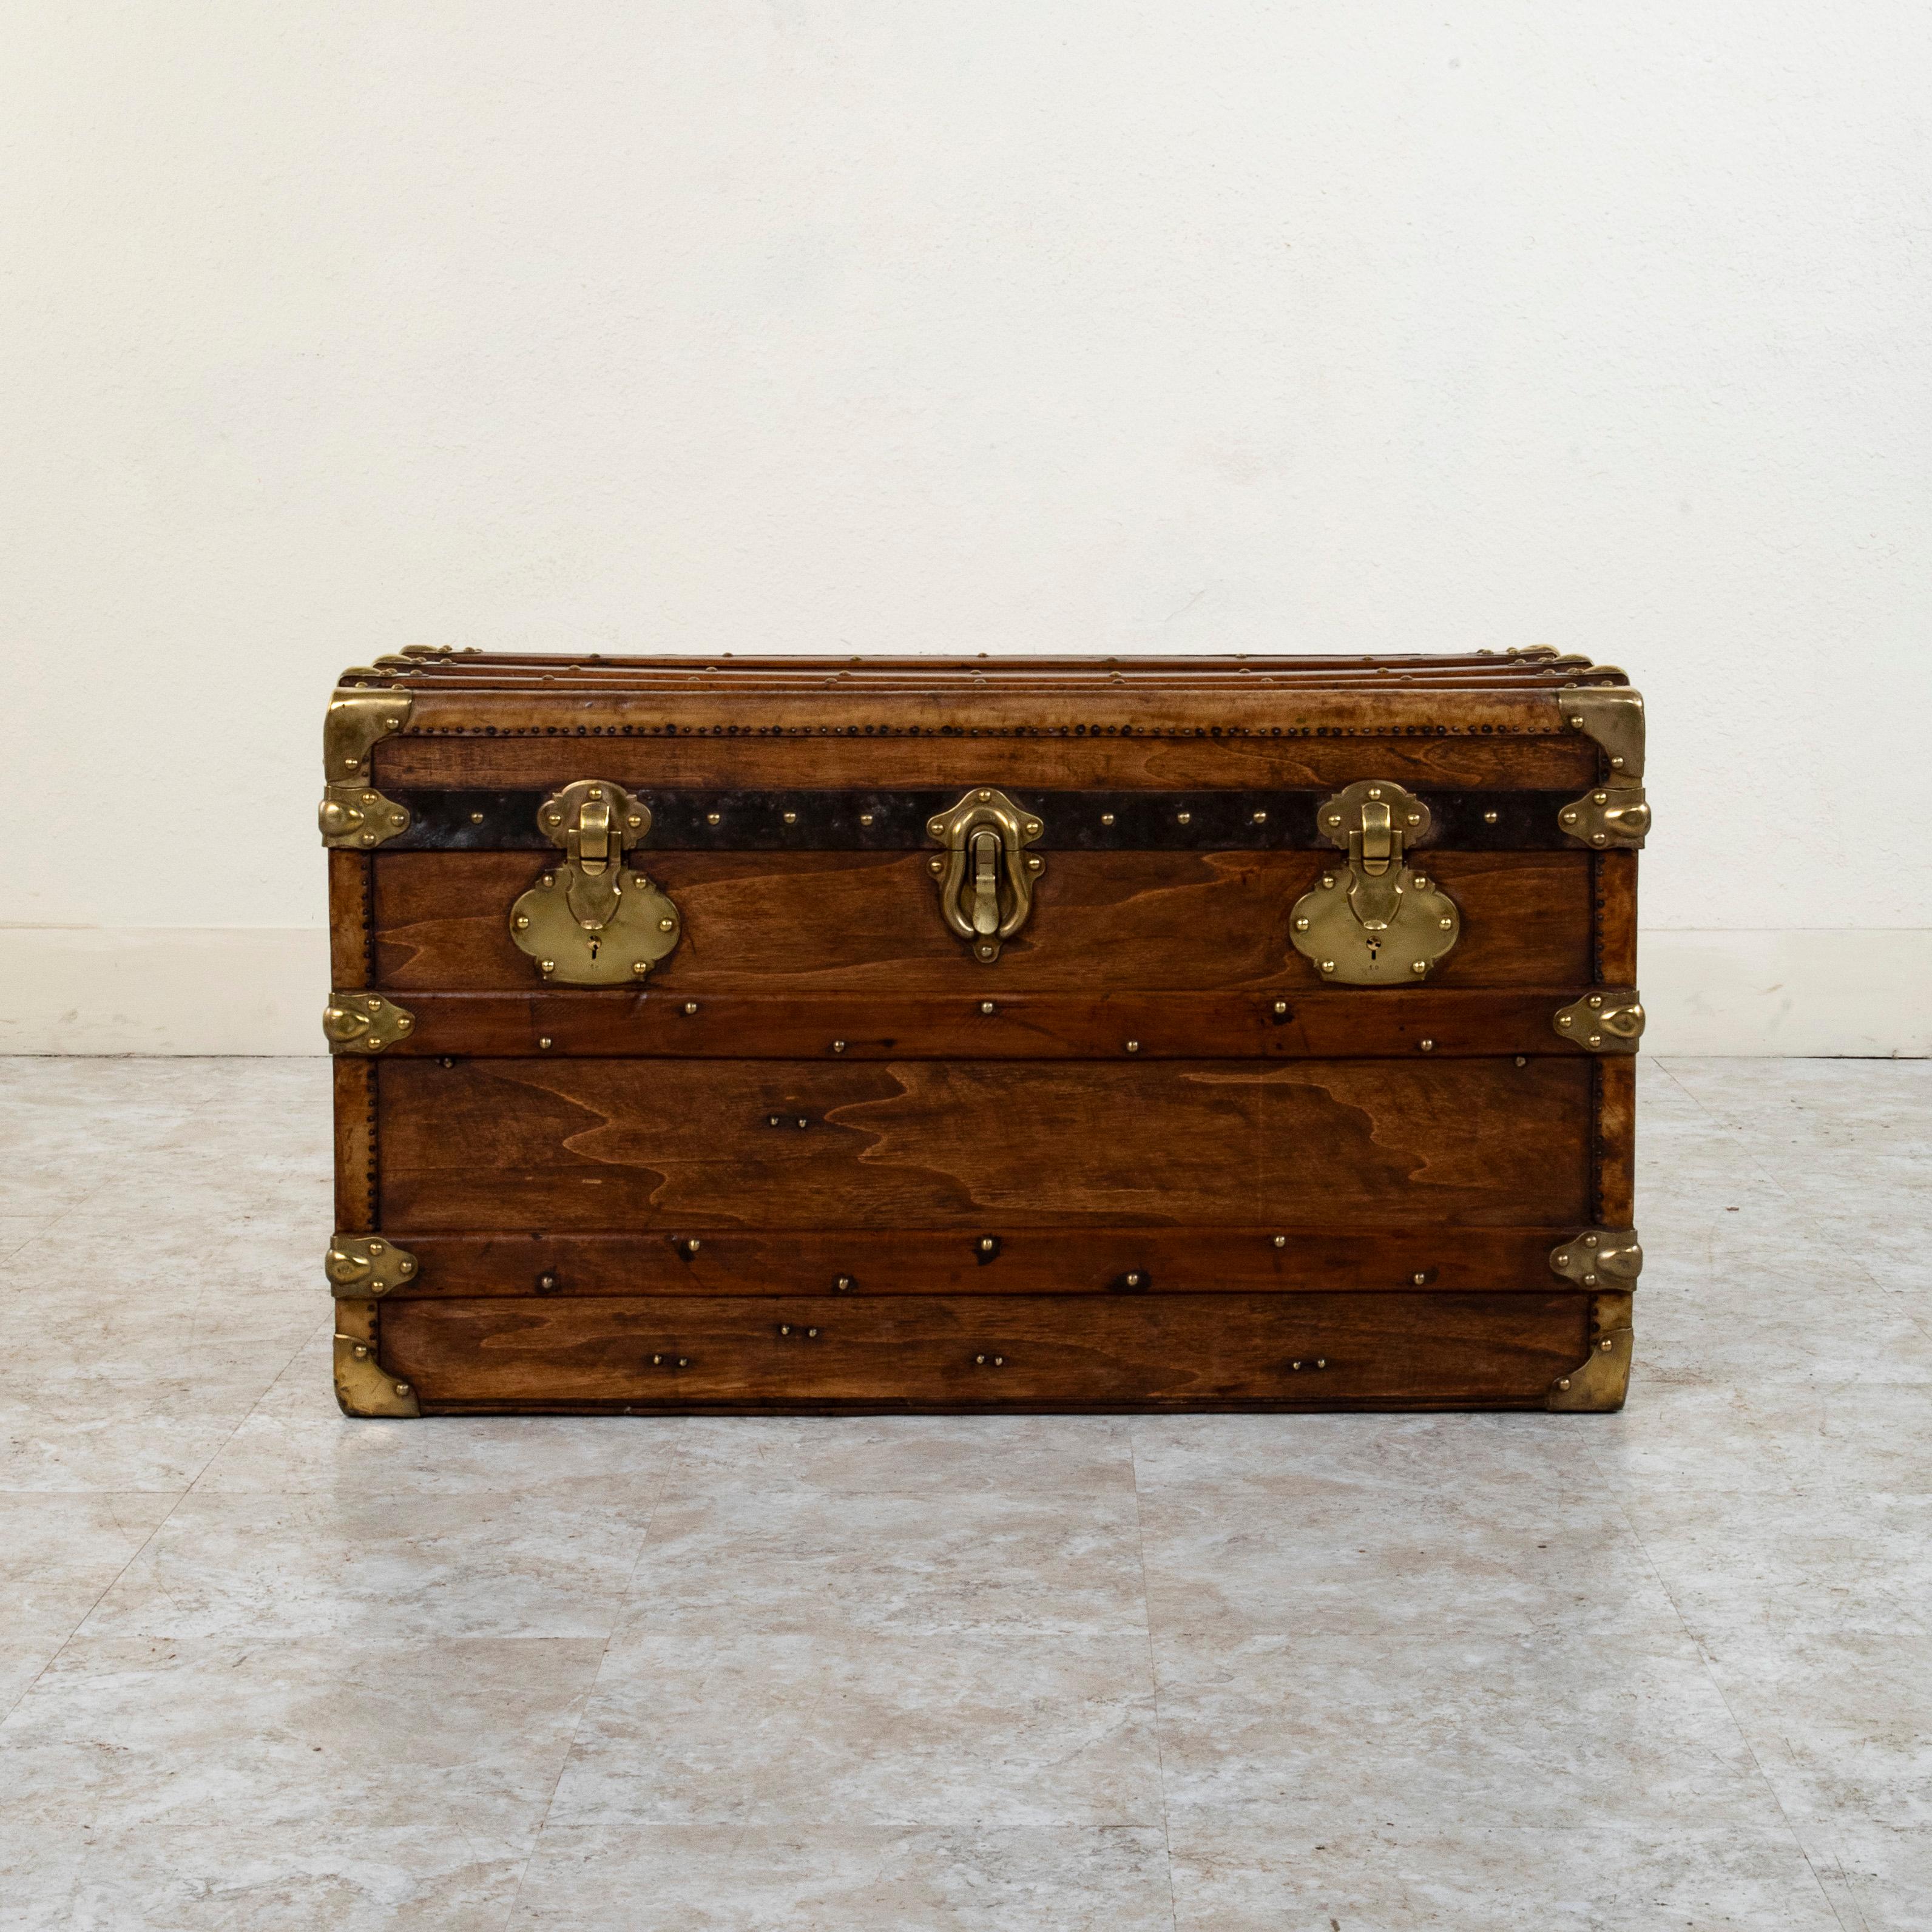 This French wooden steam trunk from the late nineteenth century features locks stamped Surete and Brevete S.G.D.G. Its wooden runners with brass rivets and brass corners offered protection from damage when traveling, and its original leather handles